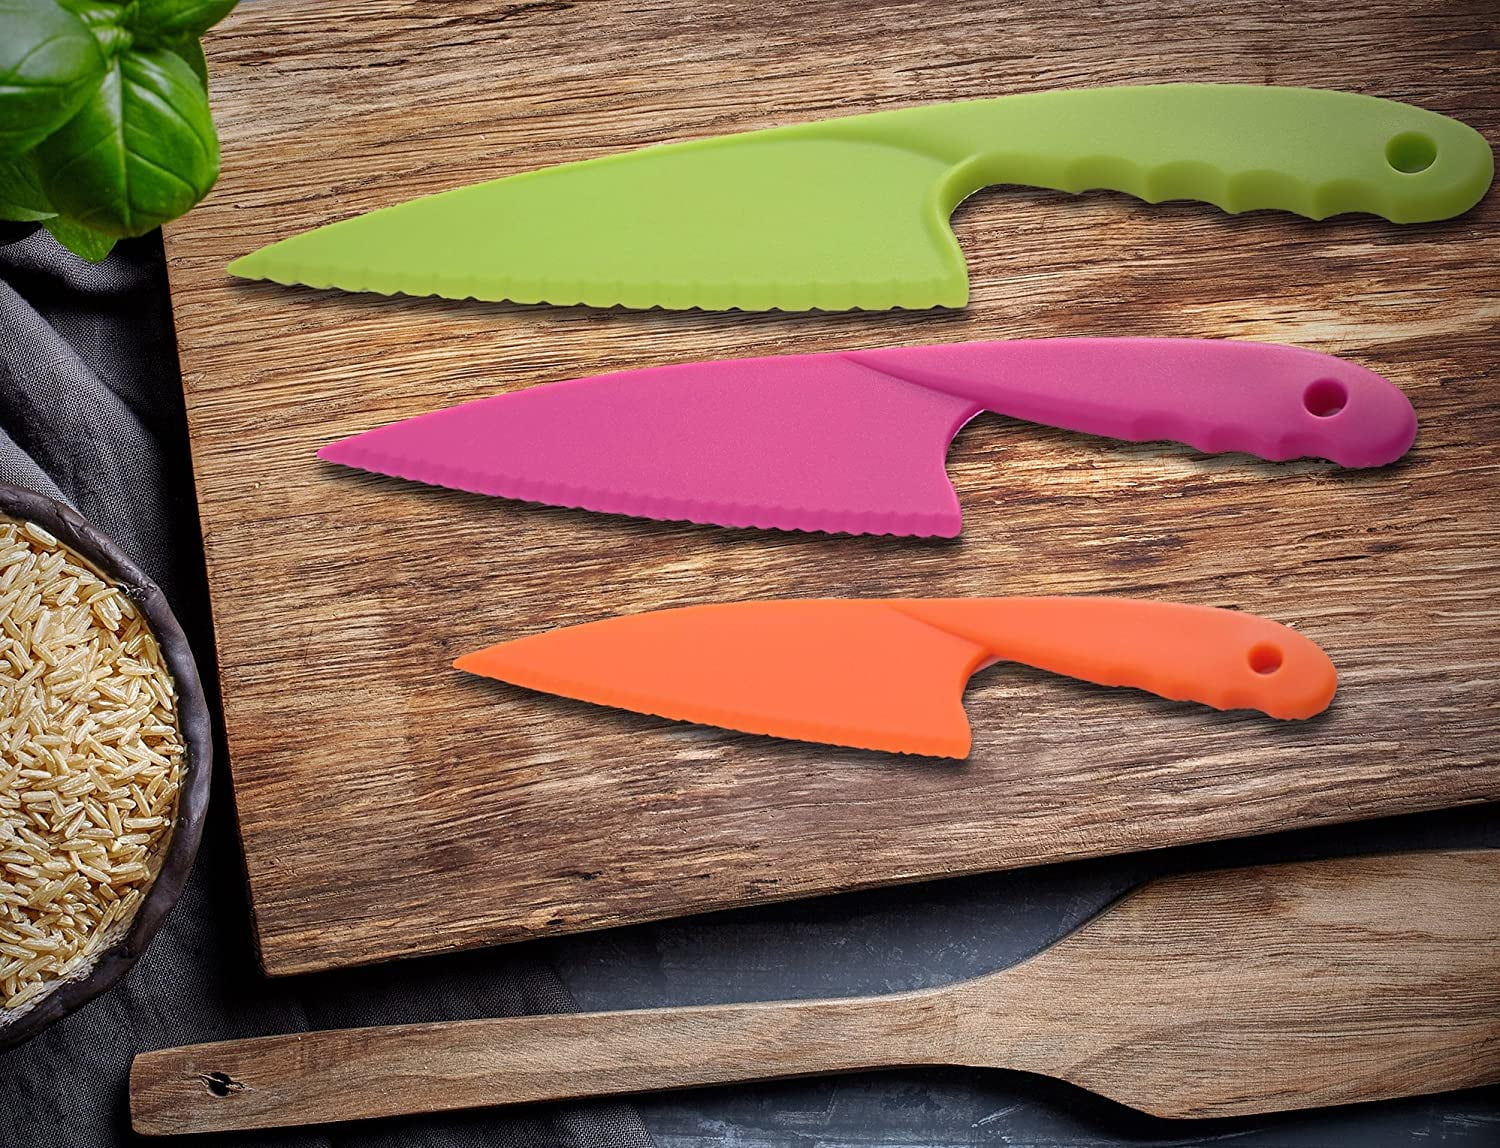 NOGIS 7 Piece Kids Cutting Board and Knife Set